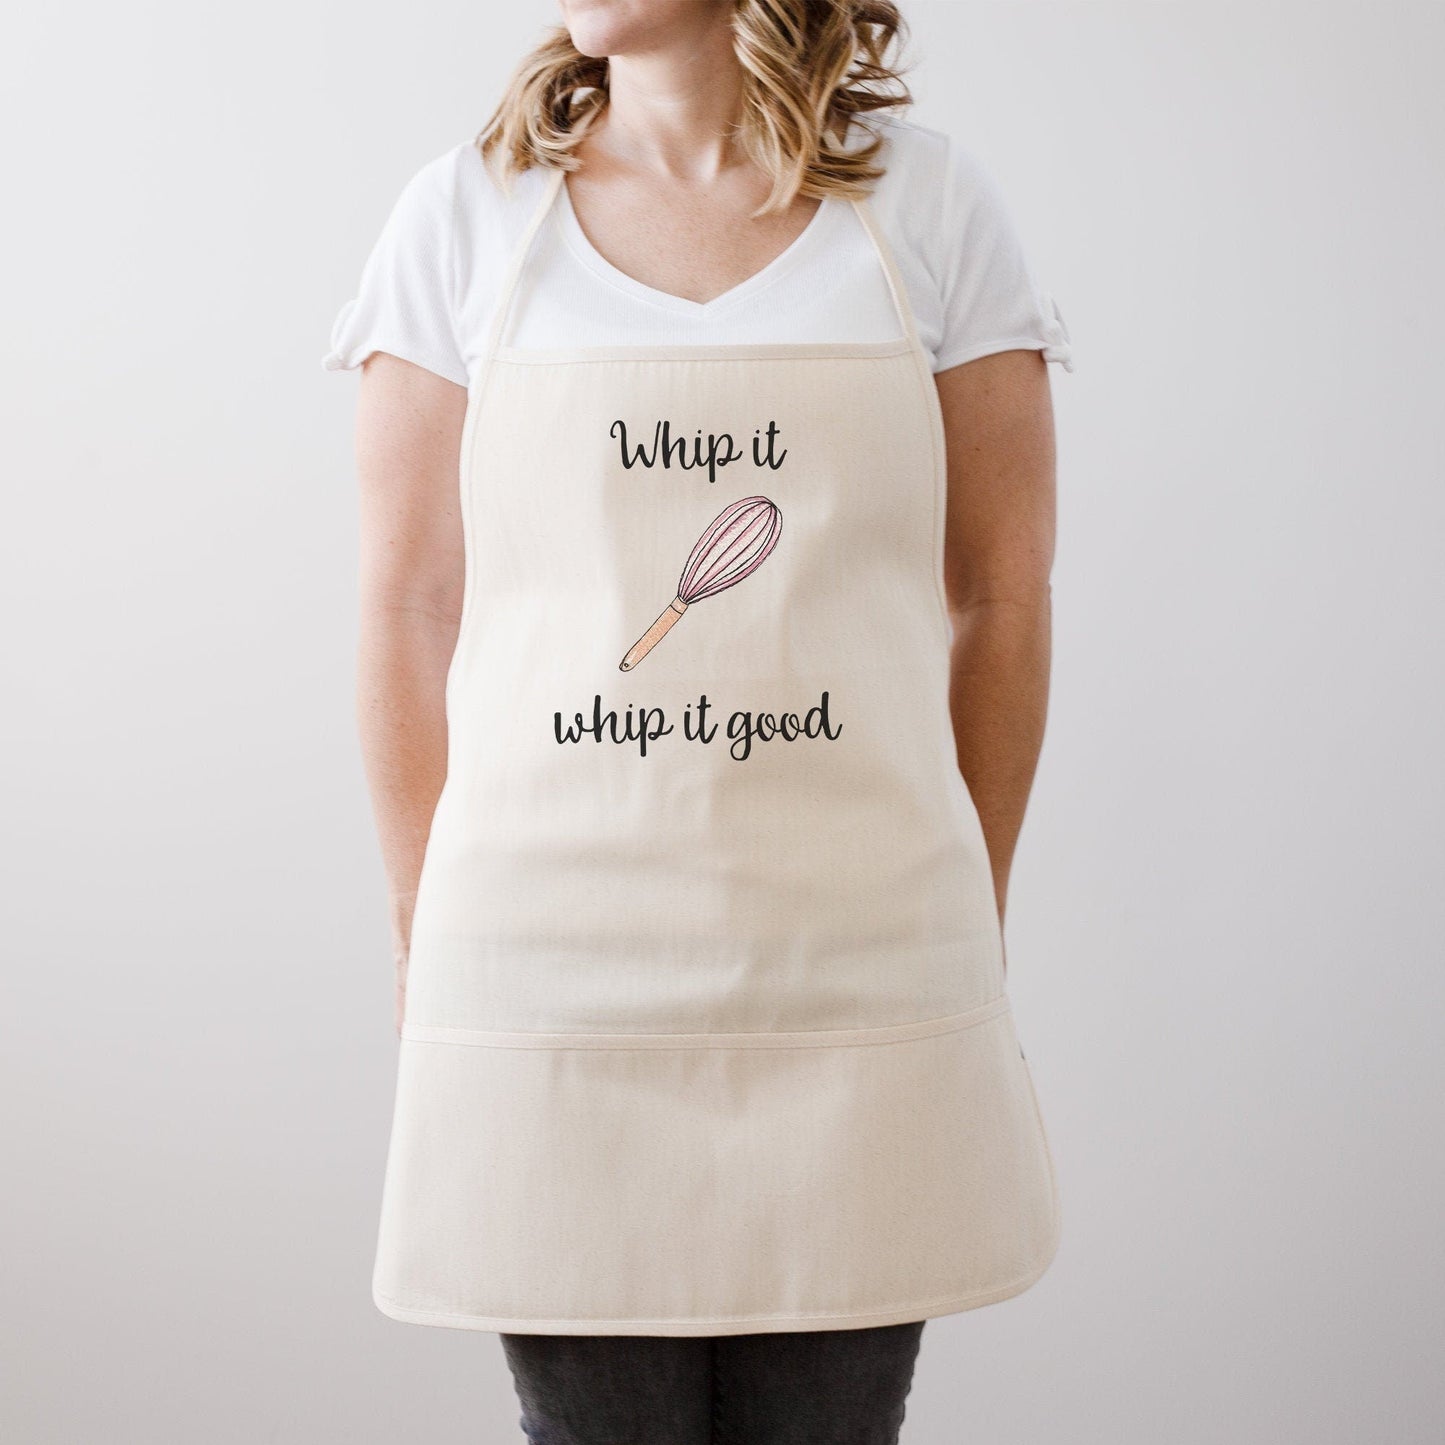 Load image into Gallery viewer, Joke Kitchen Apron Gift | Humor Apron Gifts | Funny Personalized Apron | Humor Kitchen Apron | Funny Kitchen Aprons | Custom Apron | Humor
